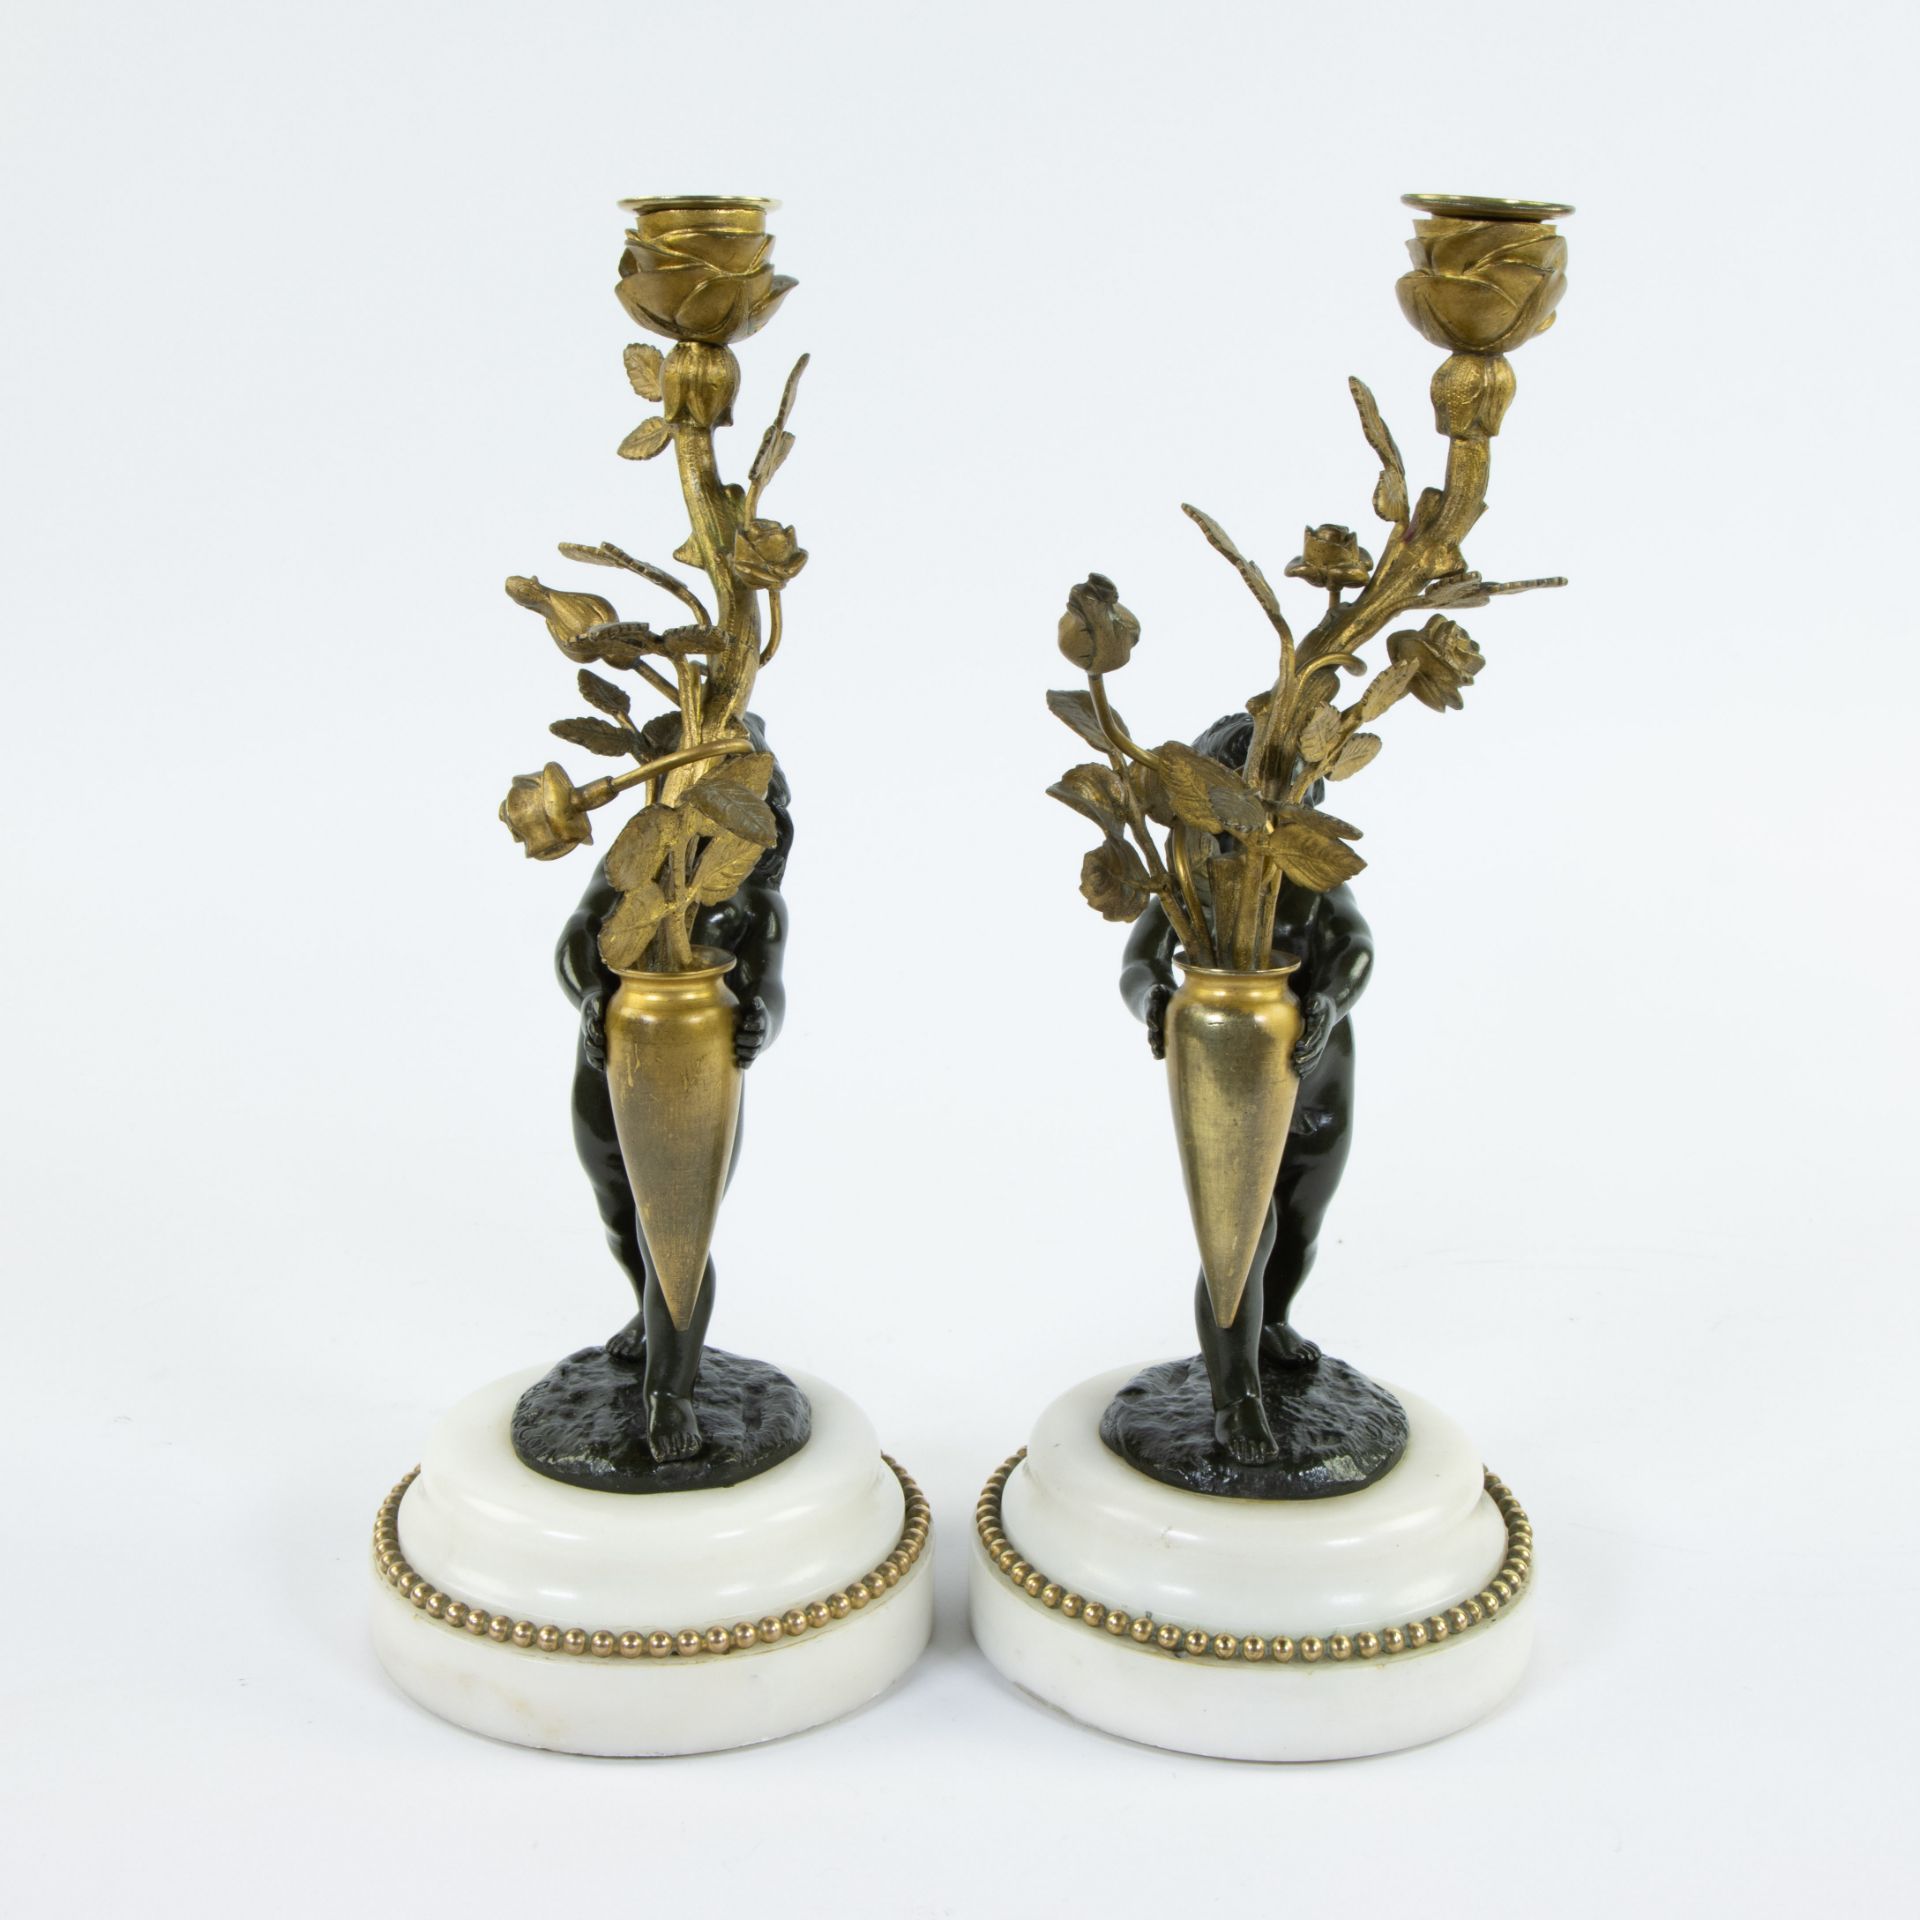 Pair of candlesticks gilded stem as light point carried by brown patinated bronze children on white - Image 2 of 5